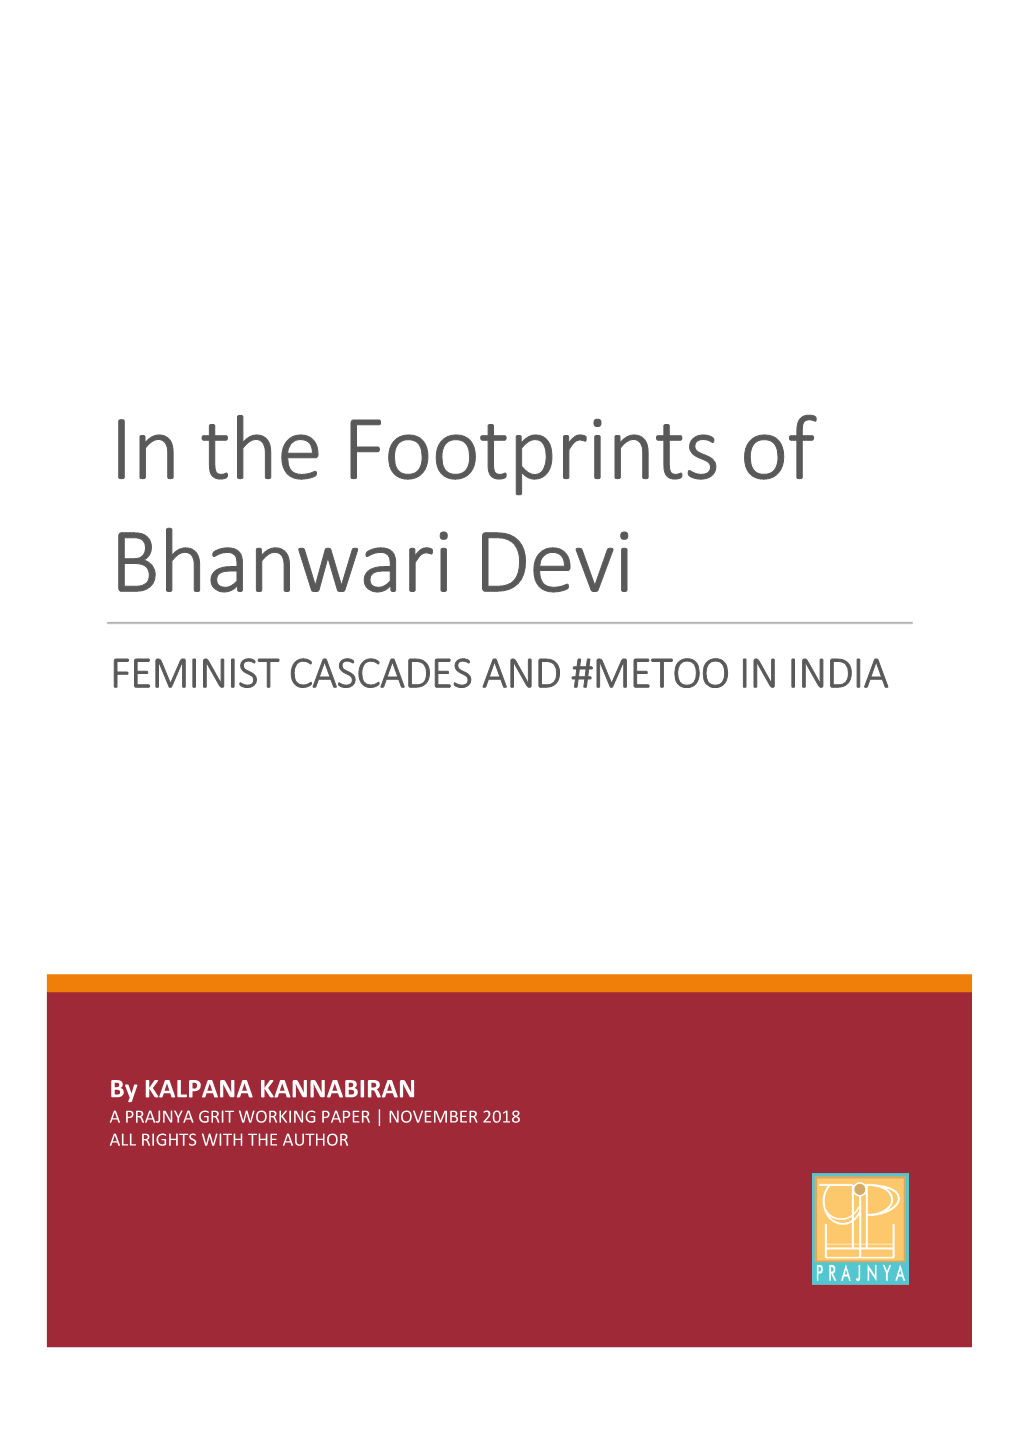 In the Footprints of Bhanwari Devi FEMINIST CASCADES and #METOO in INDIA